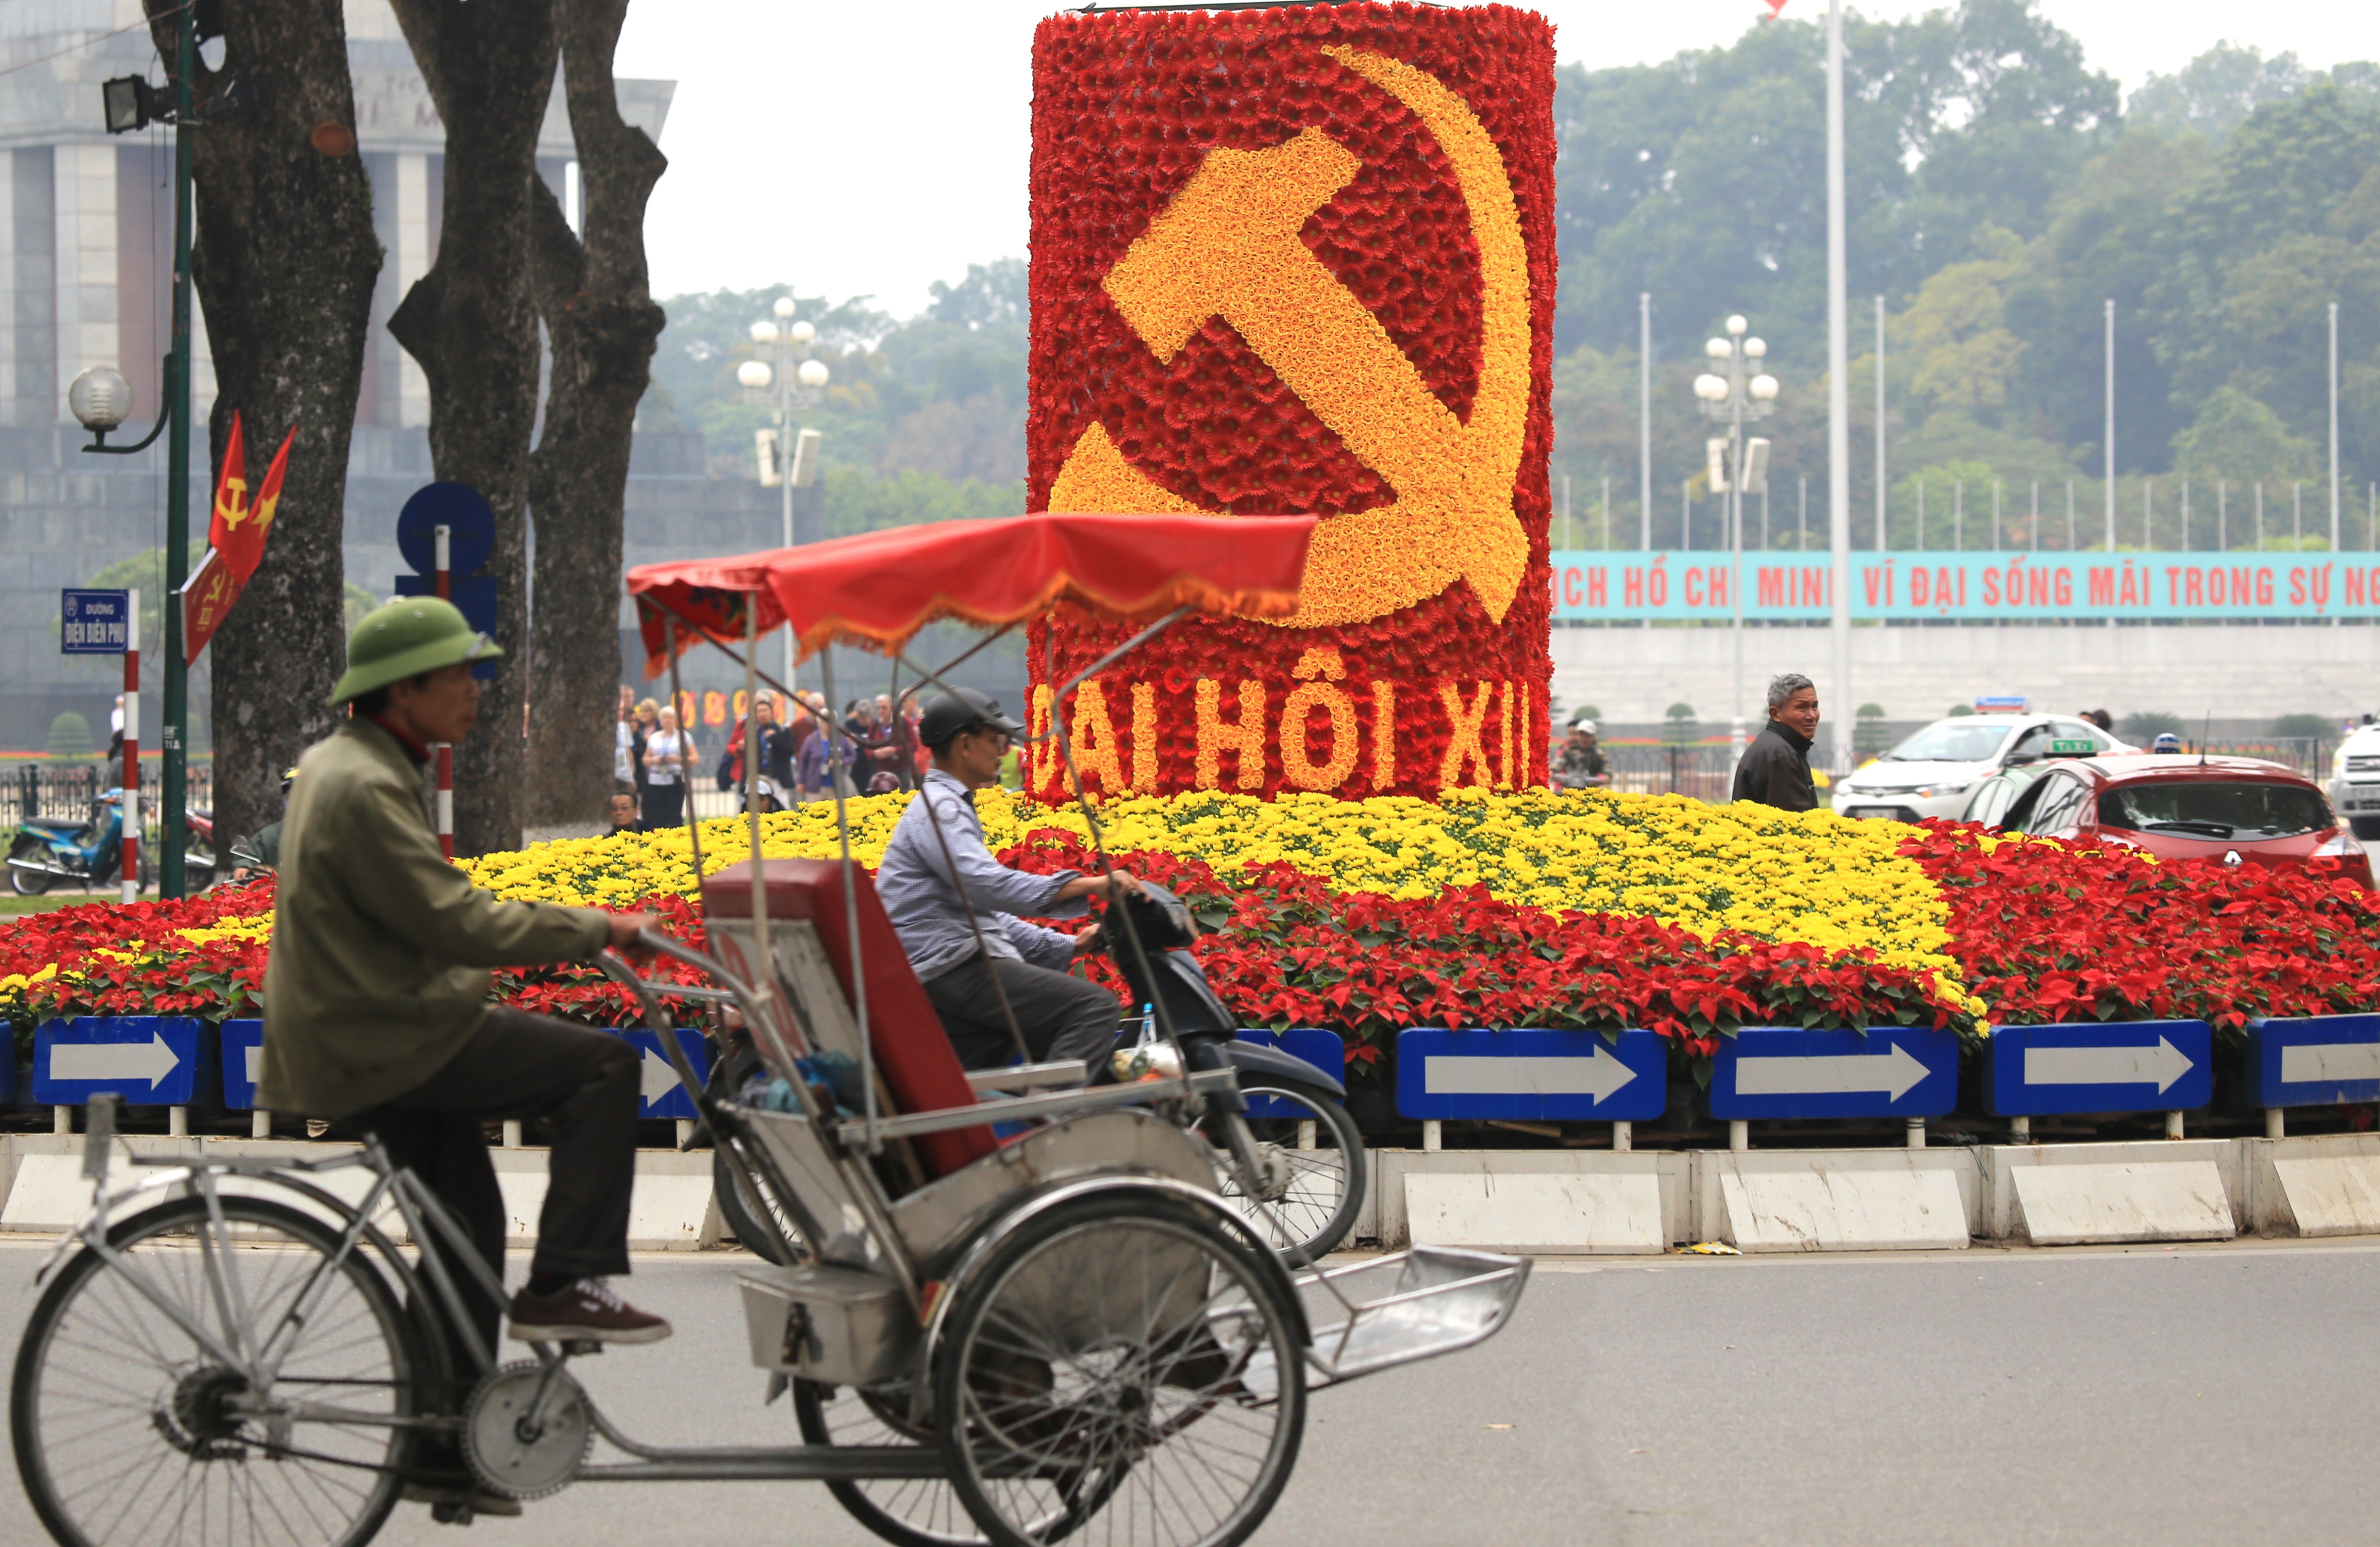 Vehicles drive past a sign marking the 12th Congress of the Communist Party of Vietnam in Hanoi on Jan. 19, 2016. This week, some 1,510 representatives of the Communist Party gather in the capital to pick the country's new leaders (Hau Dinh—AP)